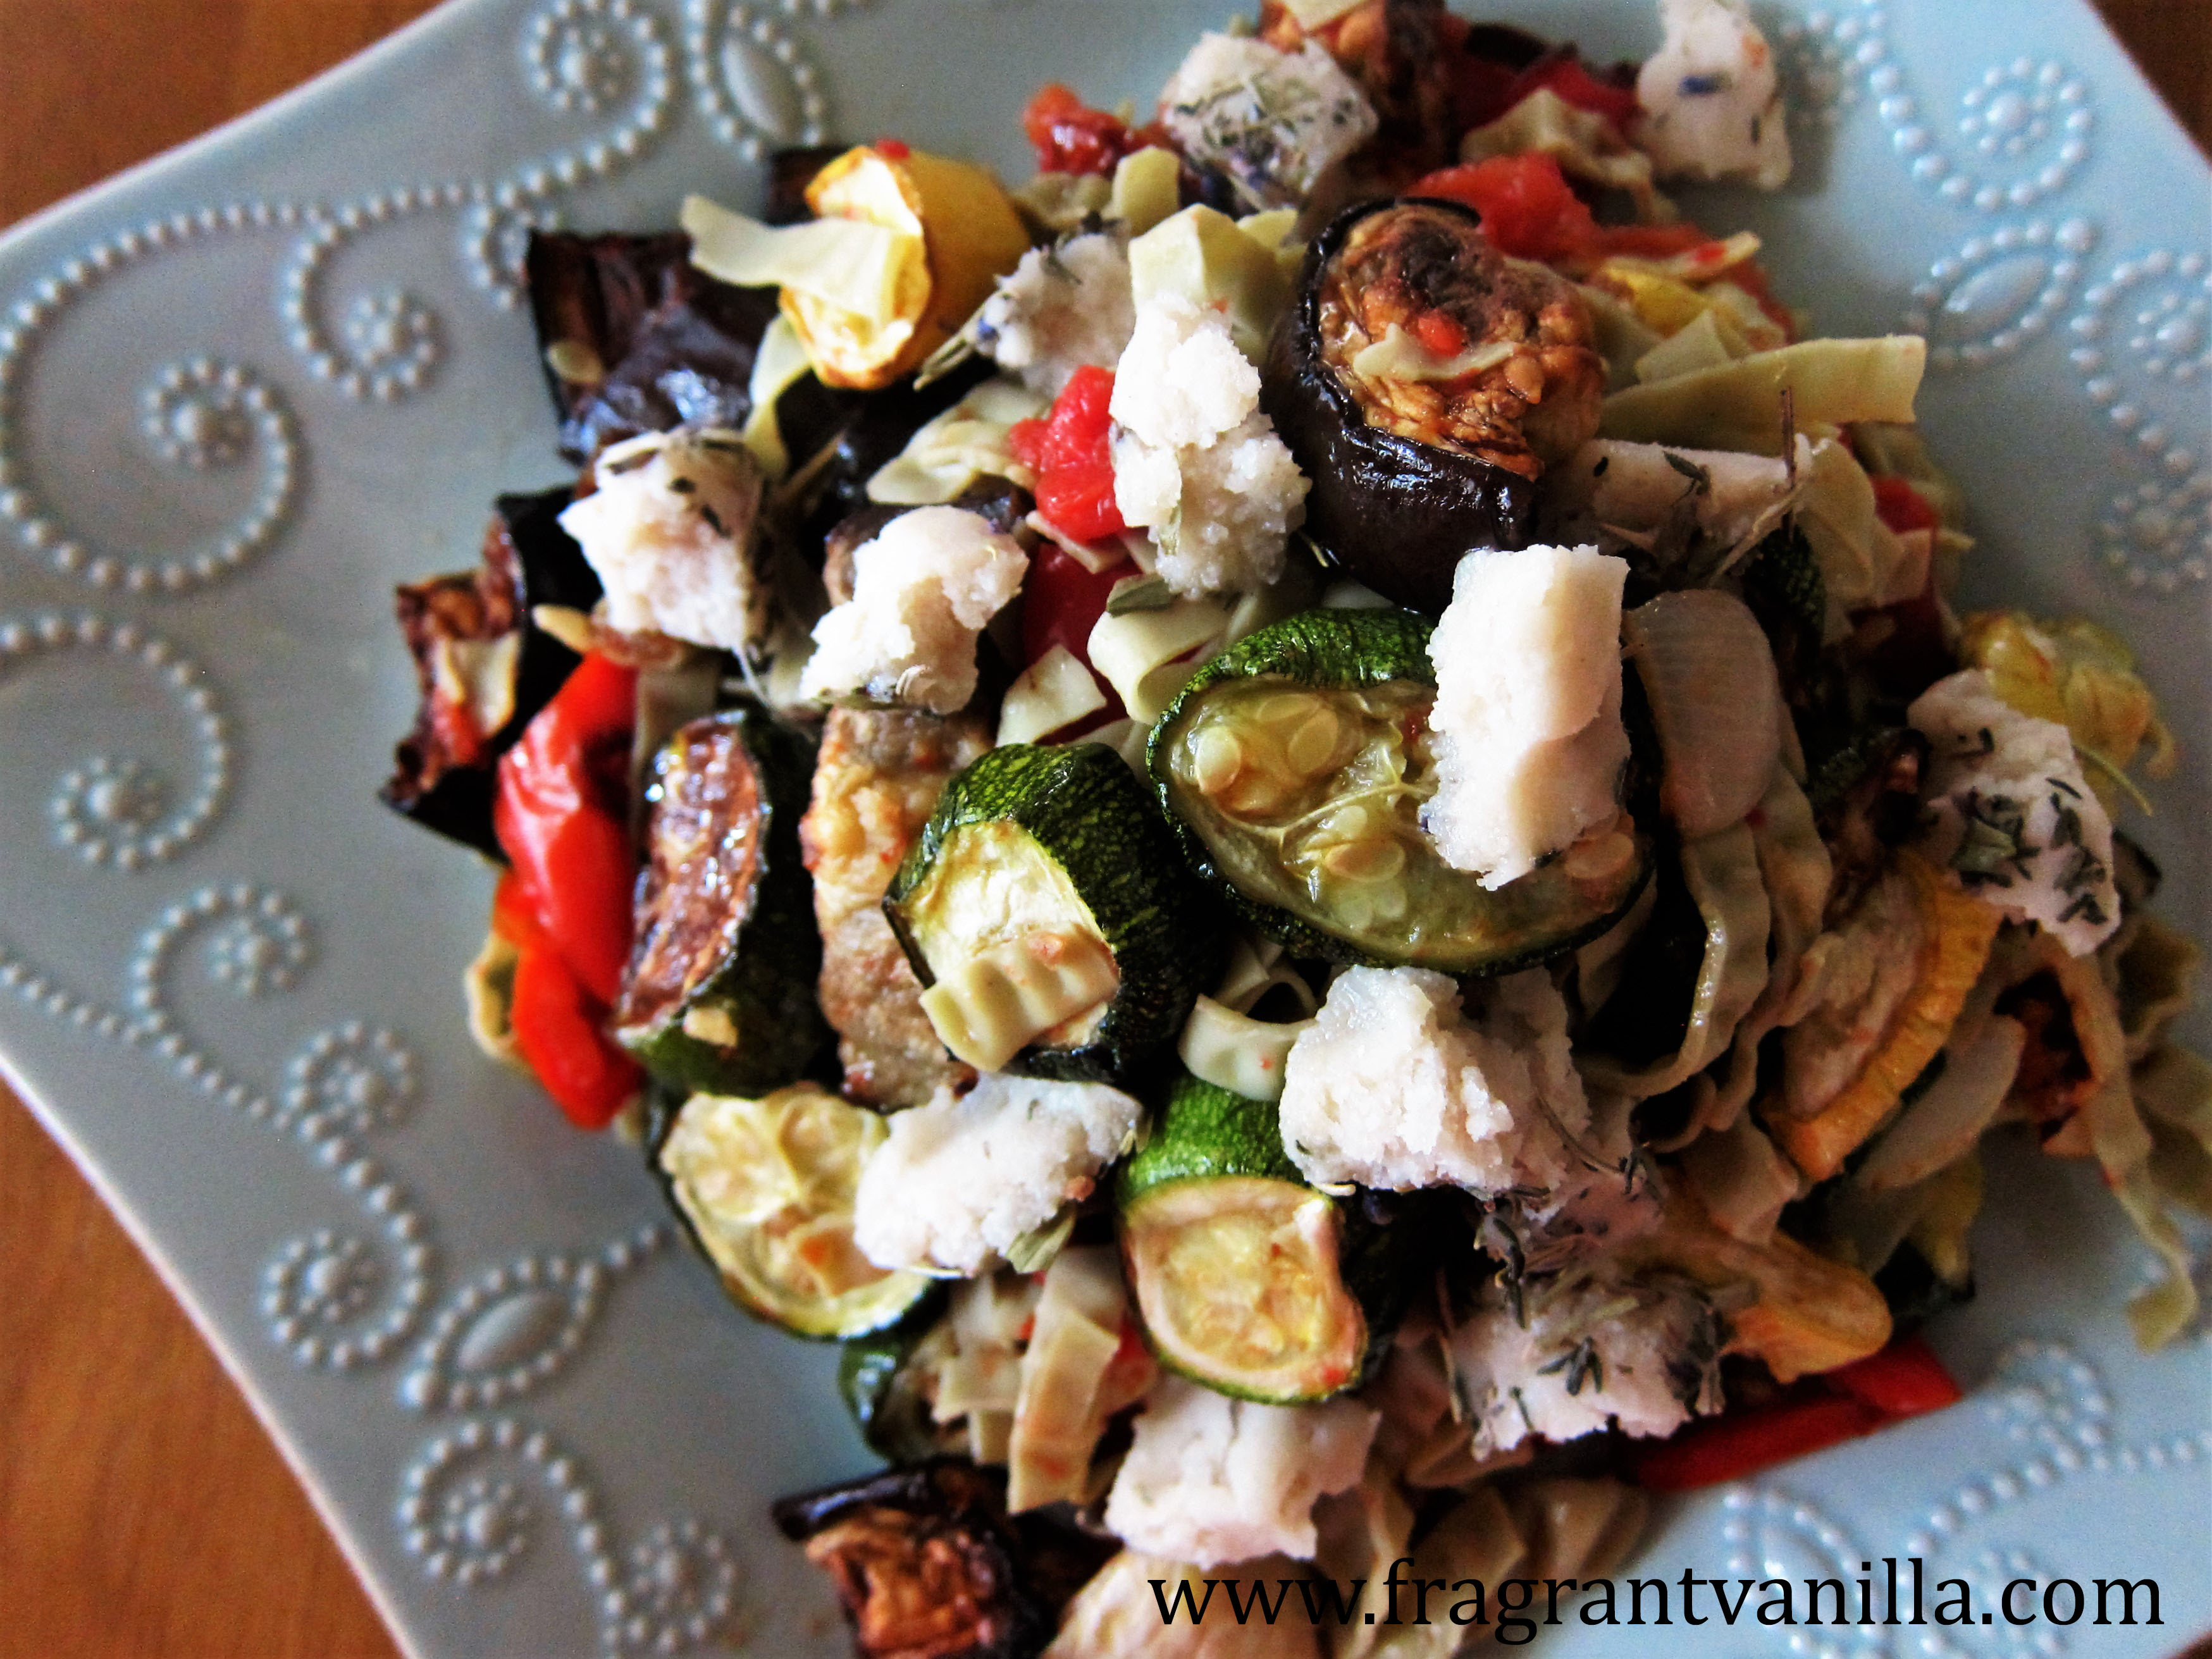 Summer Roasted Vegetable Pasta with Nut Chevre